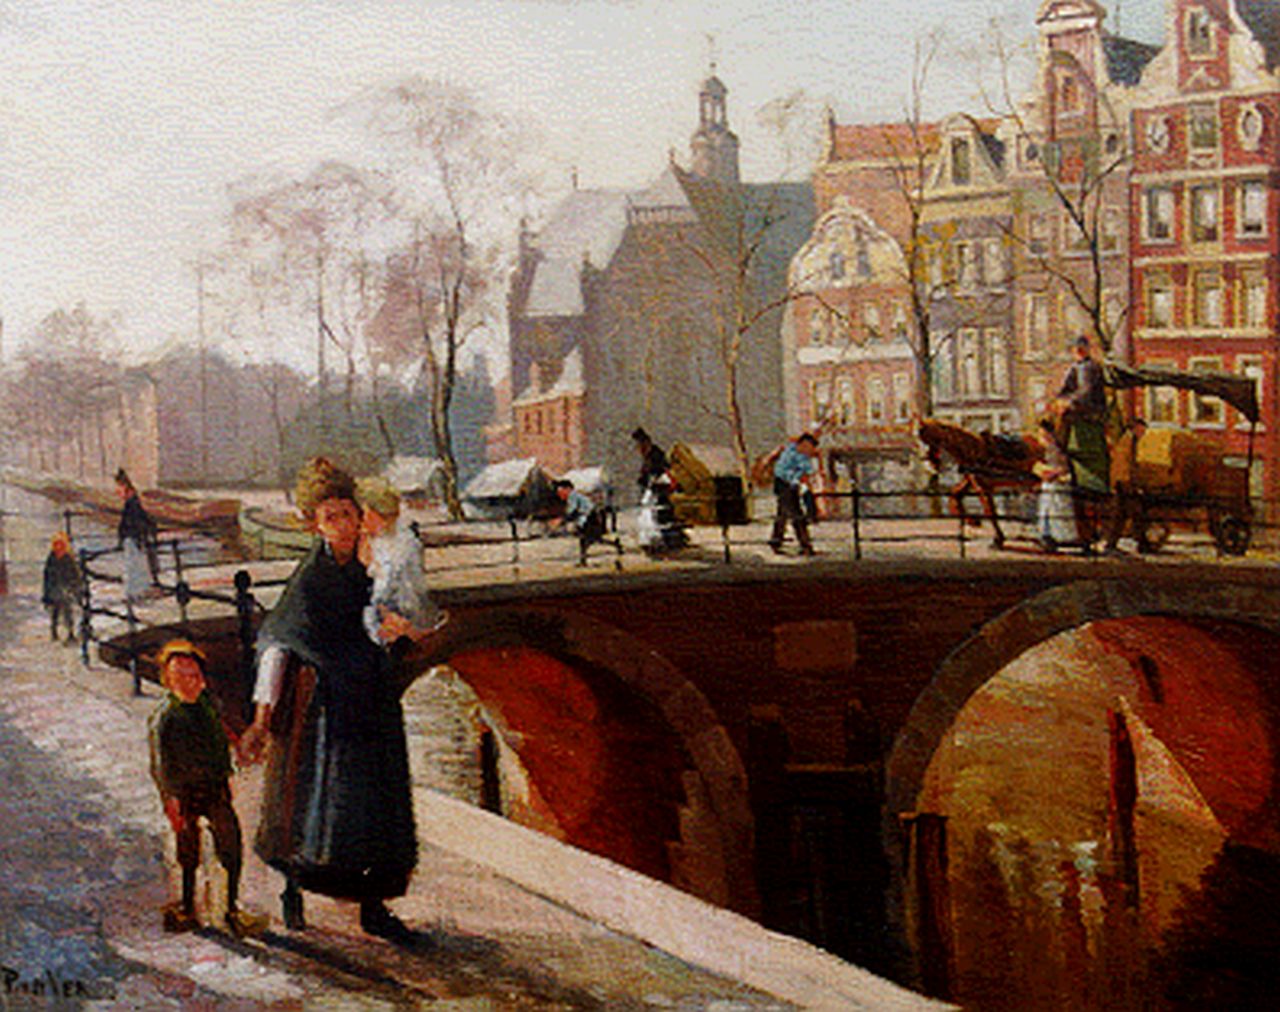 Ven P.J. van der | 'Paul' Jan van der Ven, A view of the Prinsengracht, with the Noorderkerk beyond, Amsterdam, oil on canvas 68.5 x 86.5 cm, signed l.l.